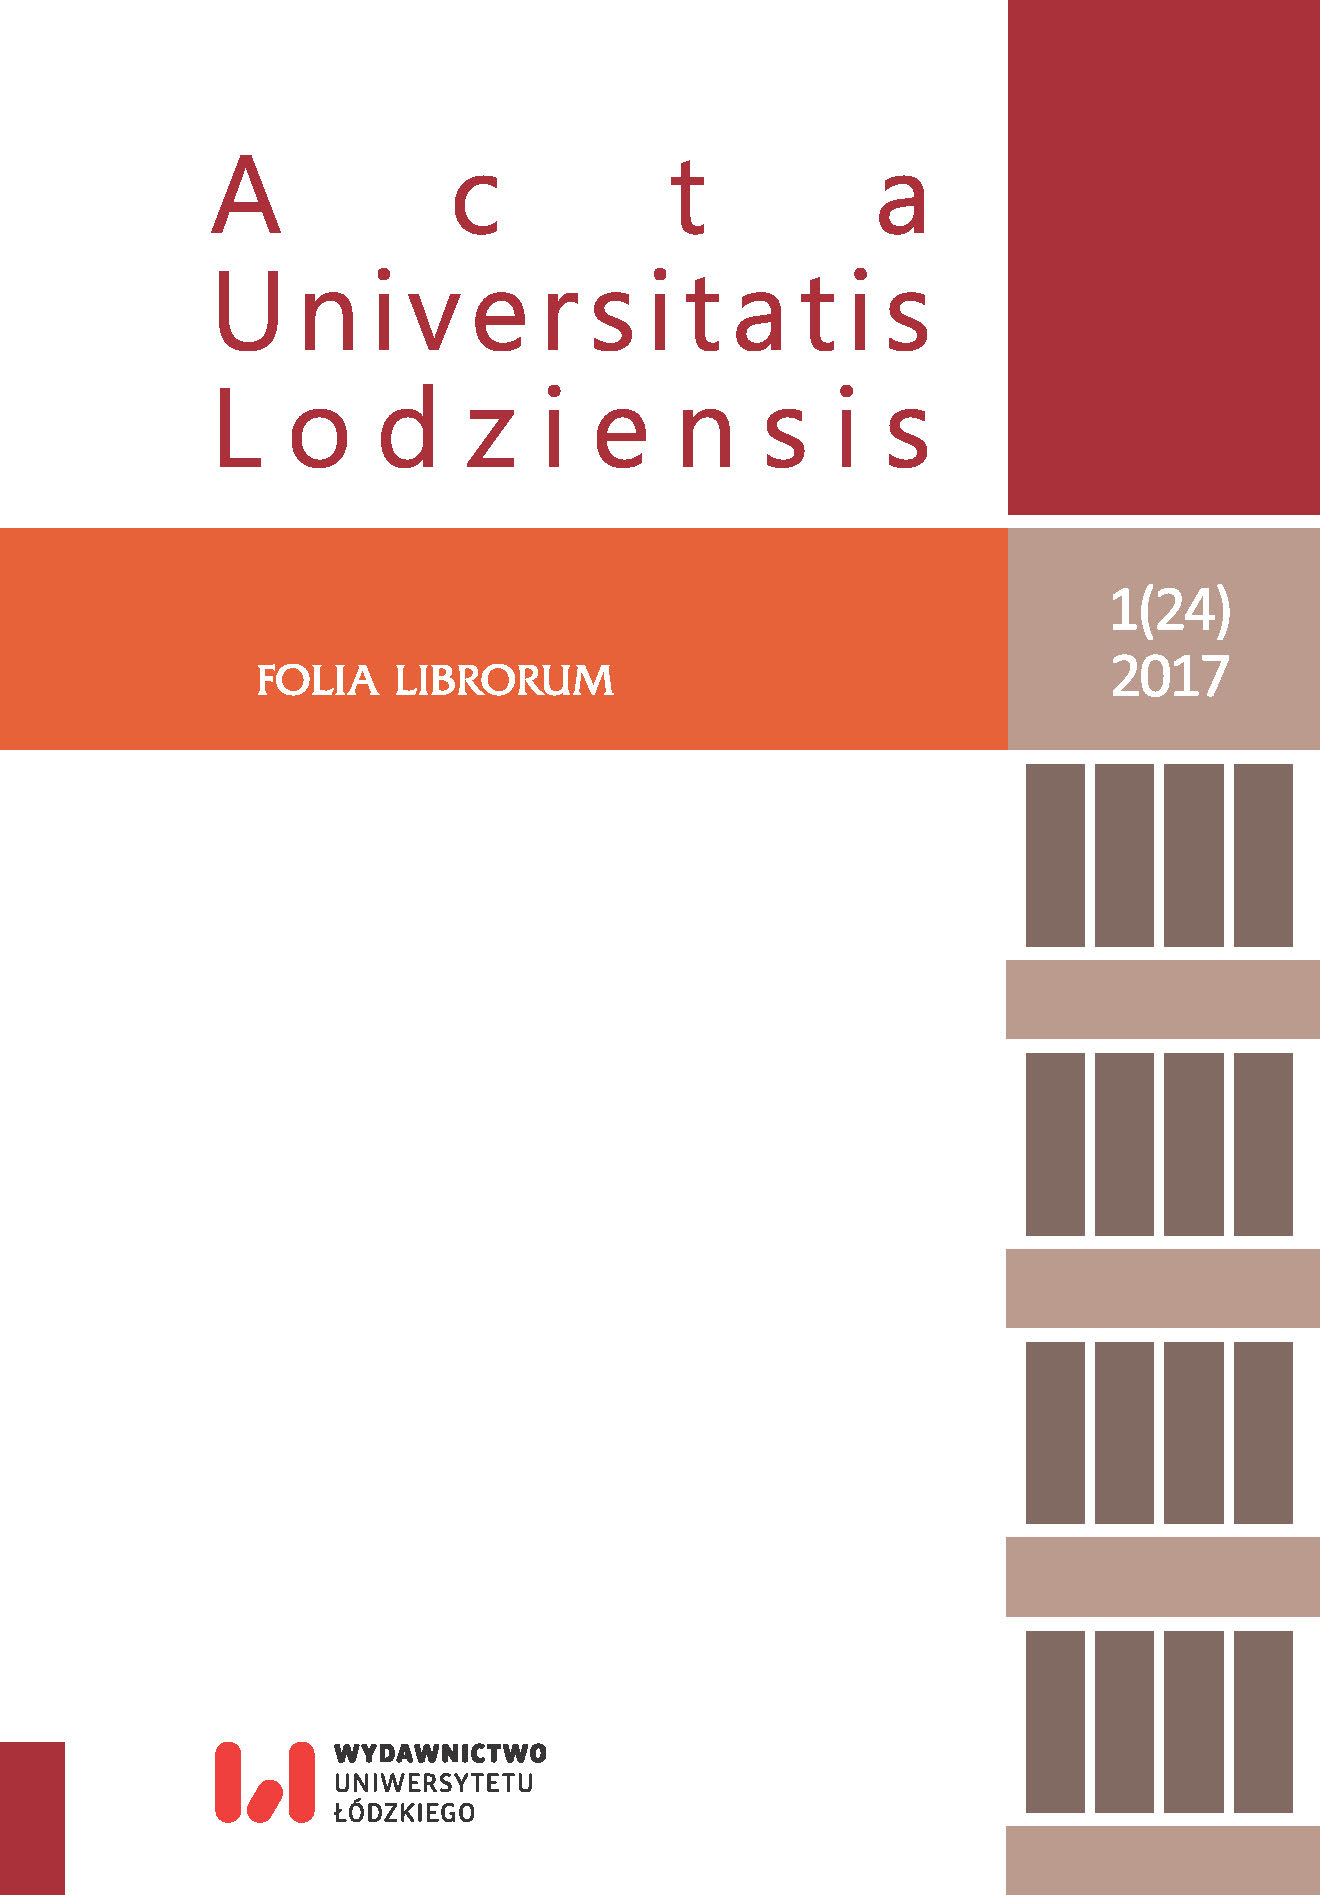 Online library courses in University of Lodz Library. Results of evaluation survey Cover Image